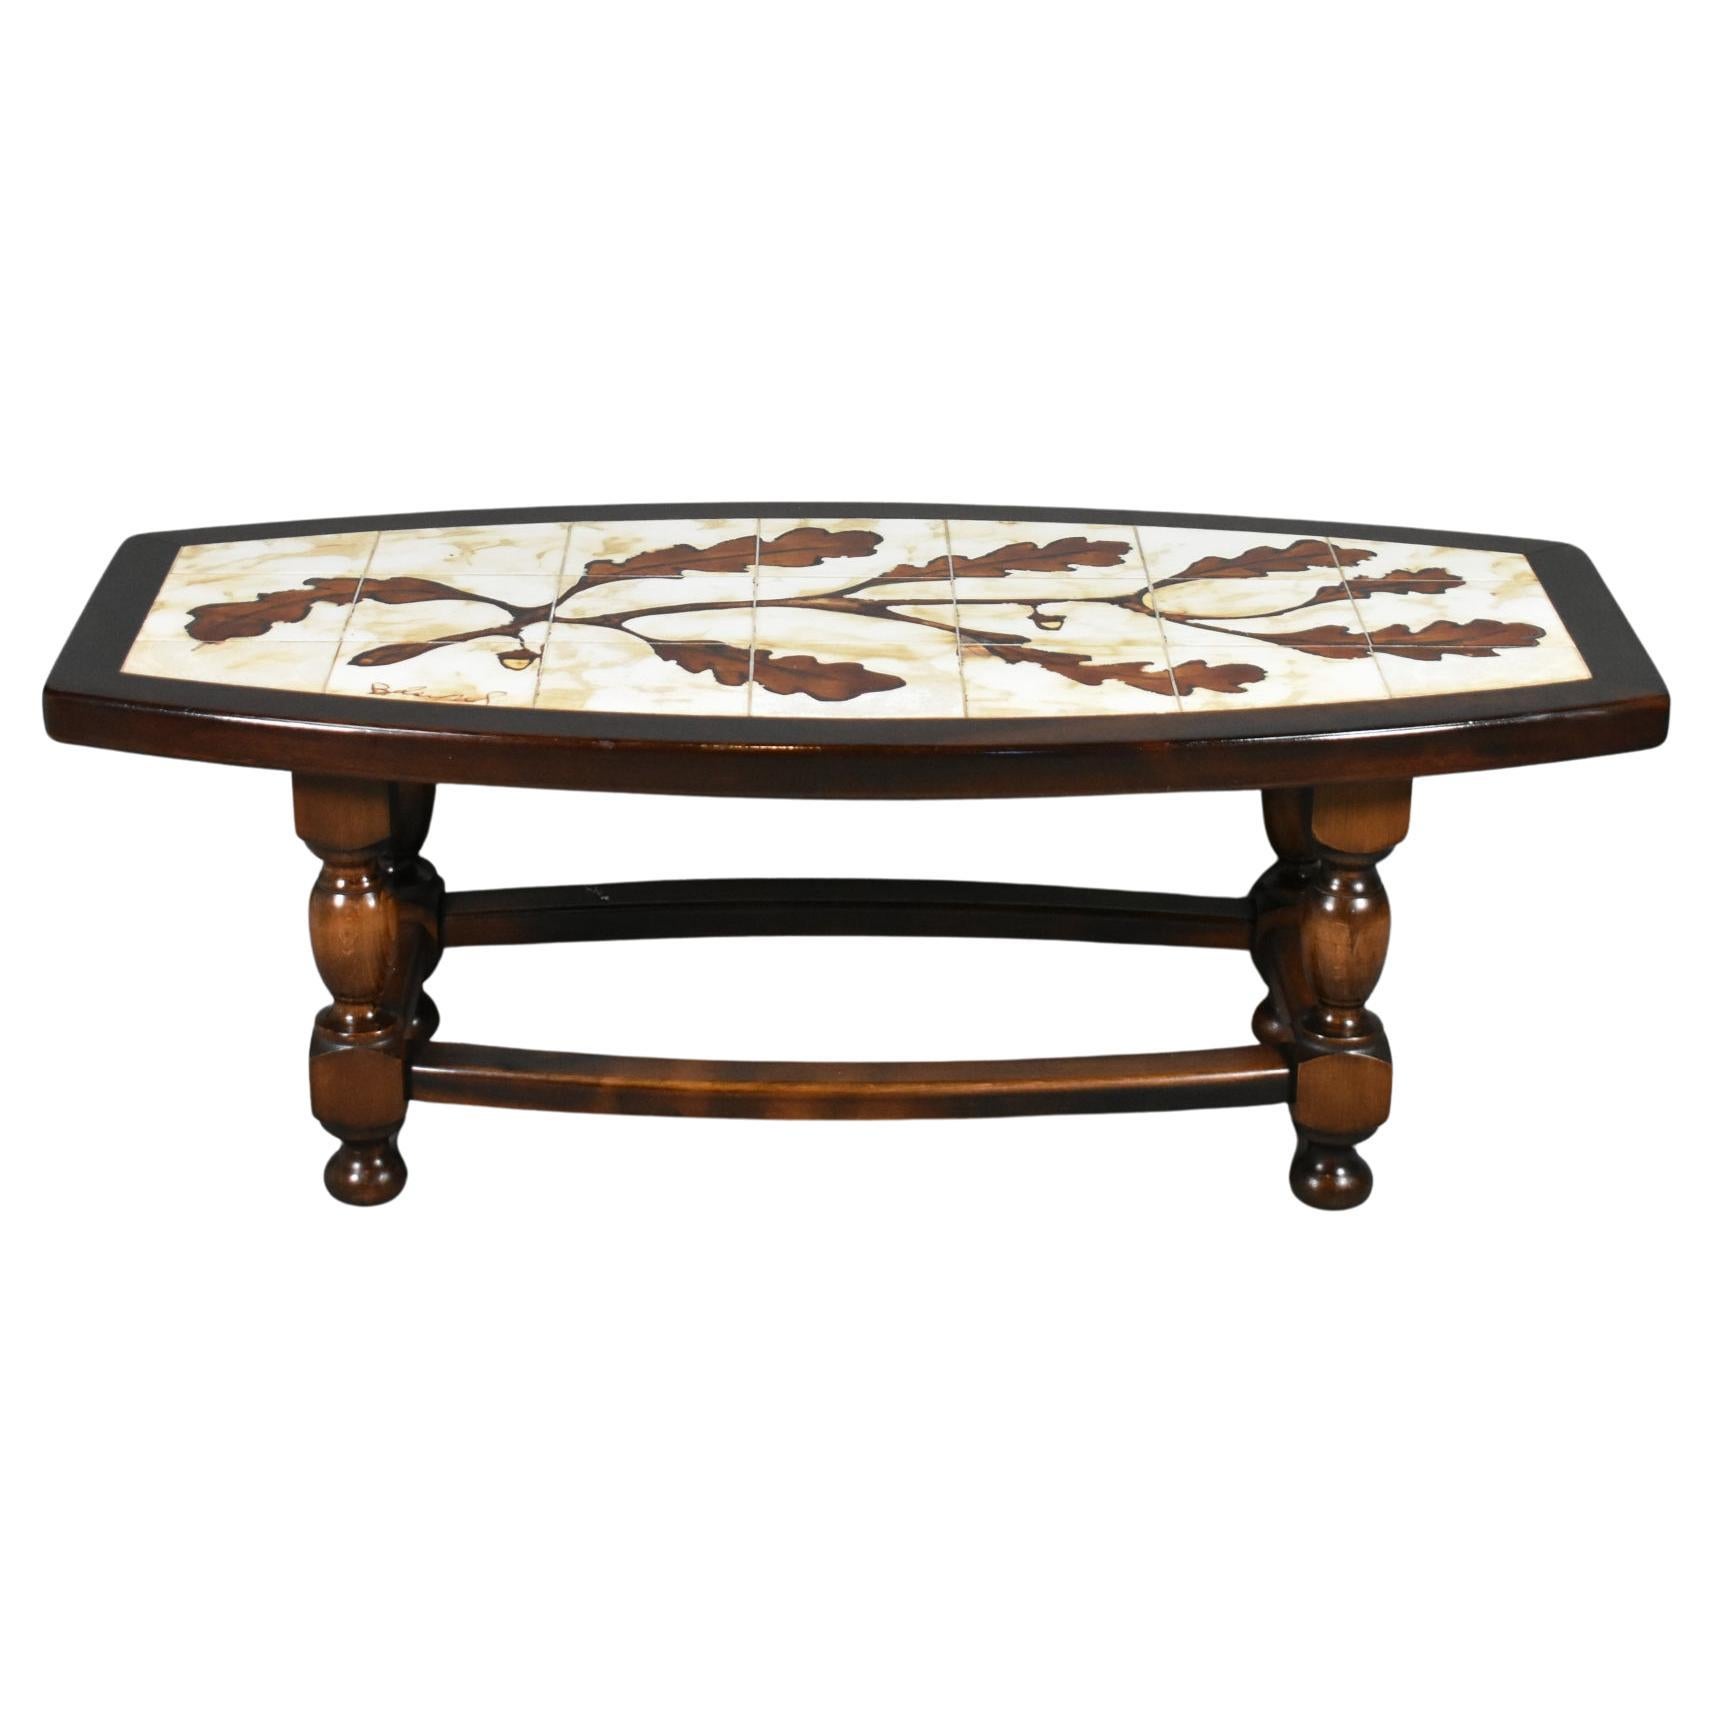 1970s French Designer Coffee Table with Tiled Signed Top For Sale